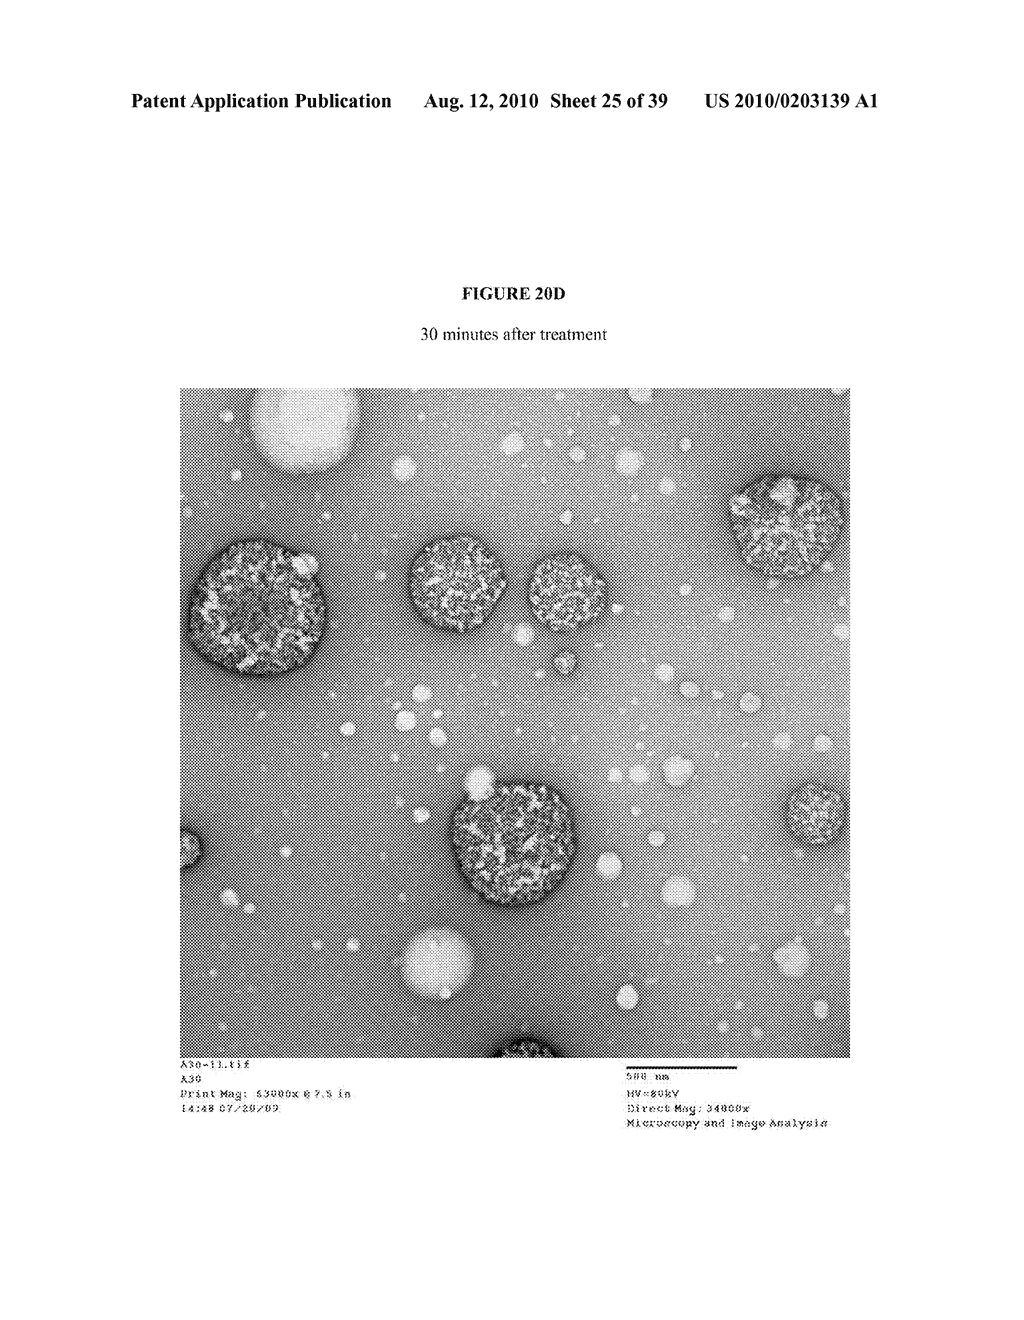 NANOEMULSION THERAPEUTIC COMPOSITIONS AND METHODS OF USING THE SAME - diagram, schematic, and image 26